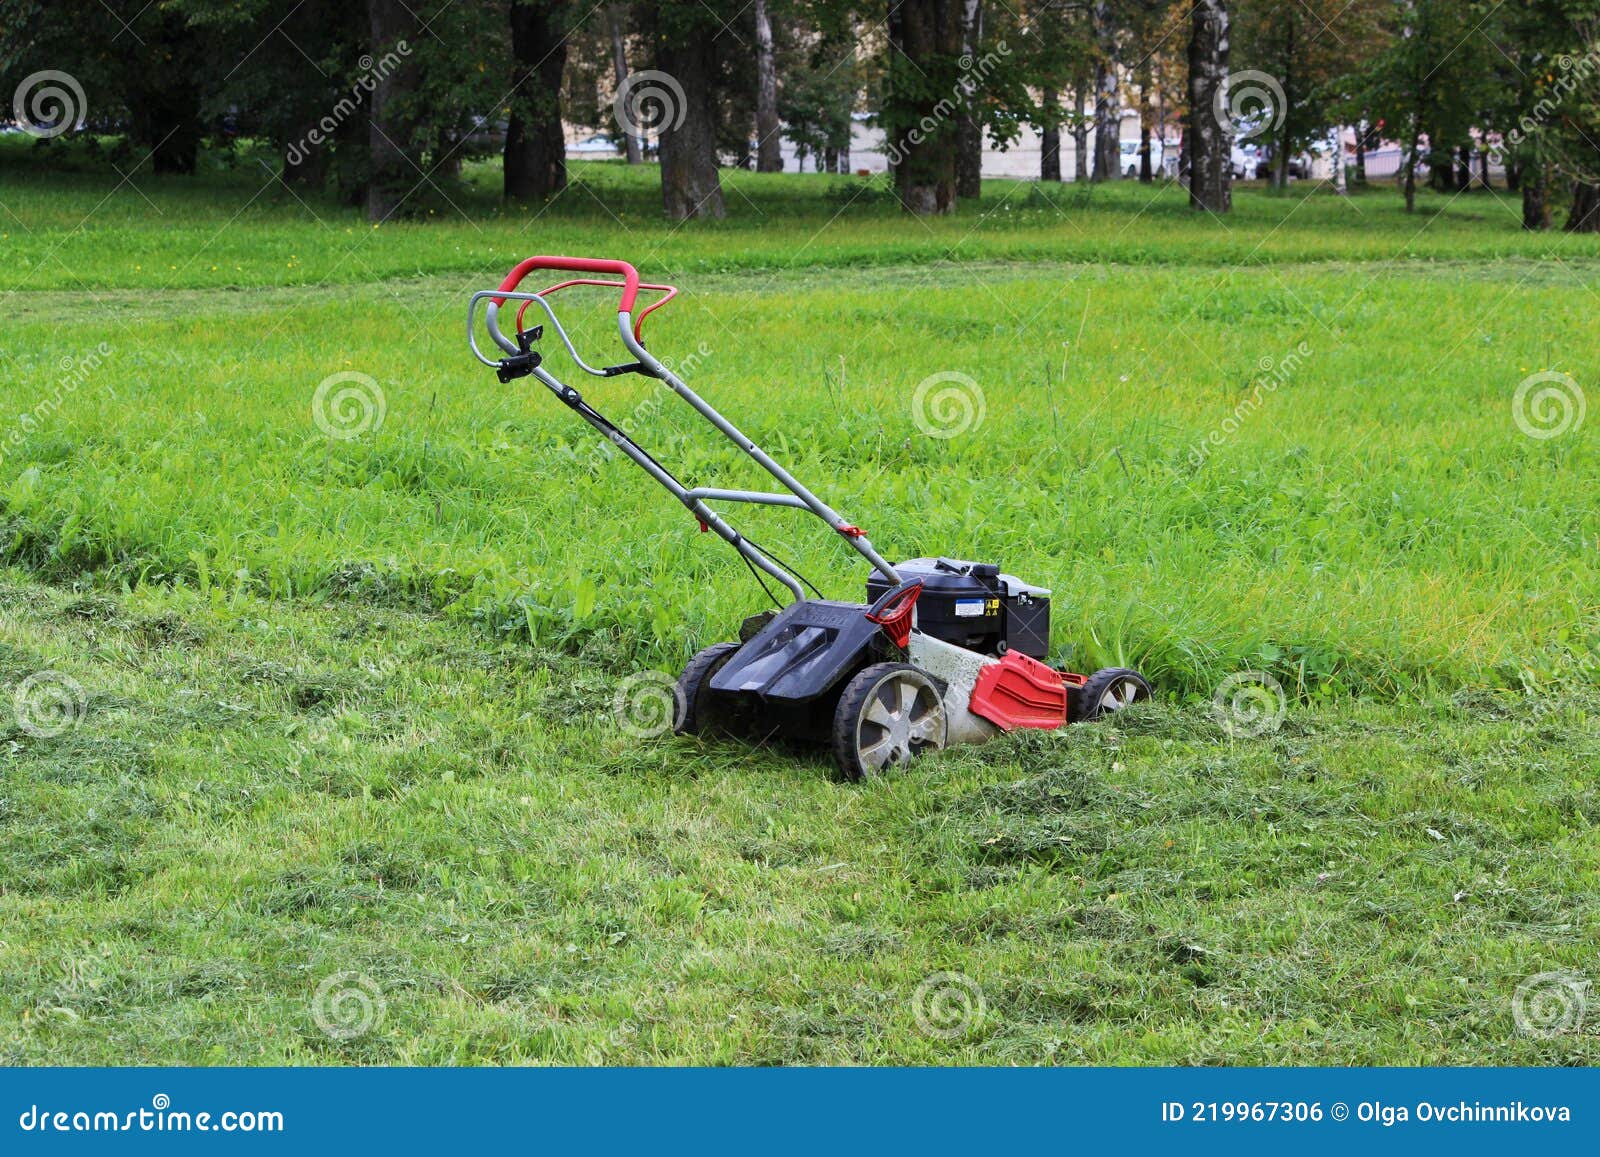 Process Of Lawn Mowing, Concept Of Mowing The Lawn, Lawnmower Cutting ...